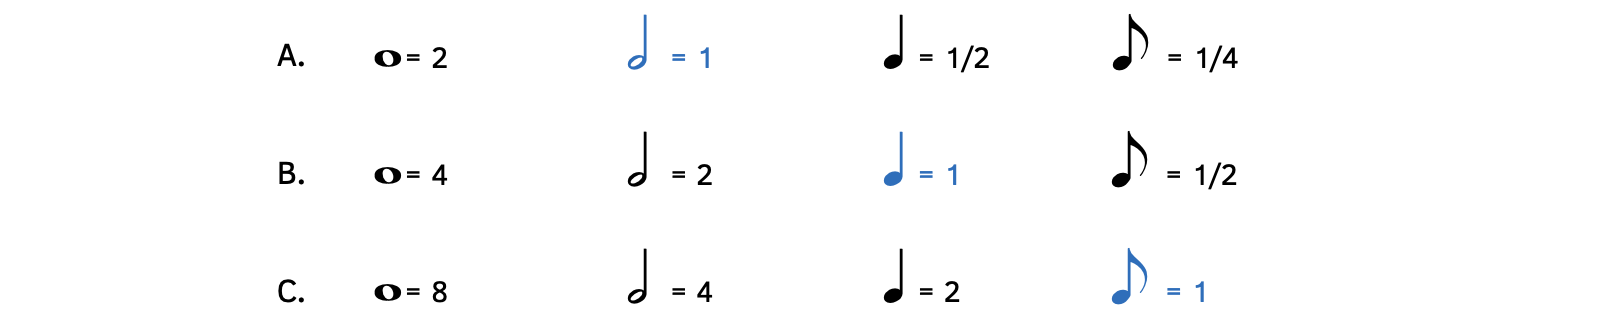 Any note value can equal one. If a half note equals one, a whole note is worth two, a quarter note is worth one-half, and an eighth note is worth one-fourth. If a quarter note equals one, a whole note is worth four, a half note is worth 2, and an eighth note is worth half. If an eighth note equals one, a whole note is worth 8, a half note is worth 4, and a quarter note is worth 2.